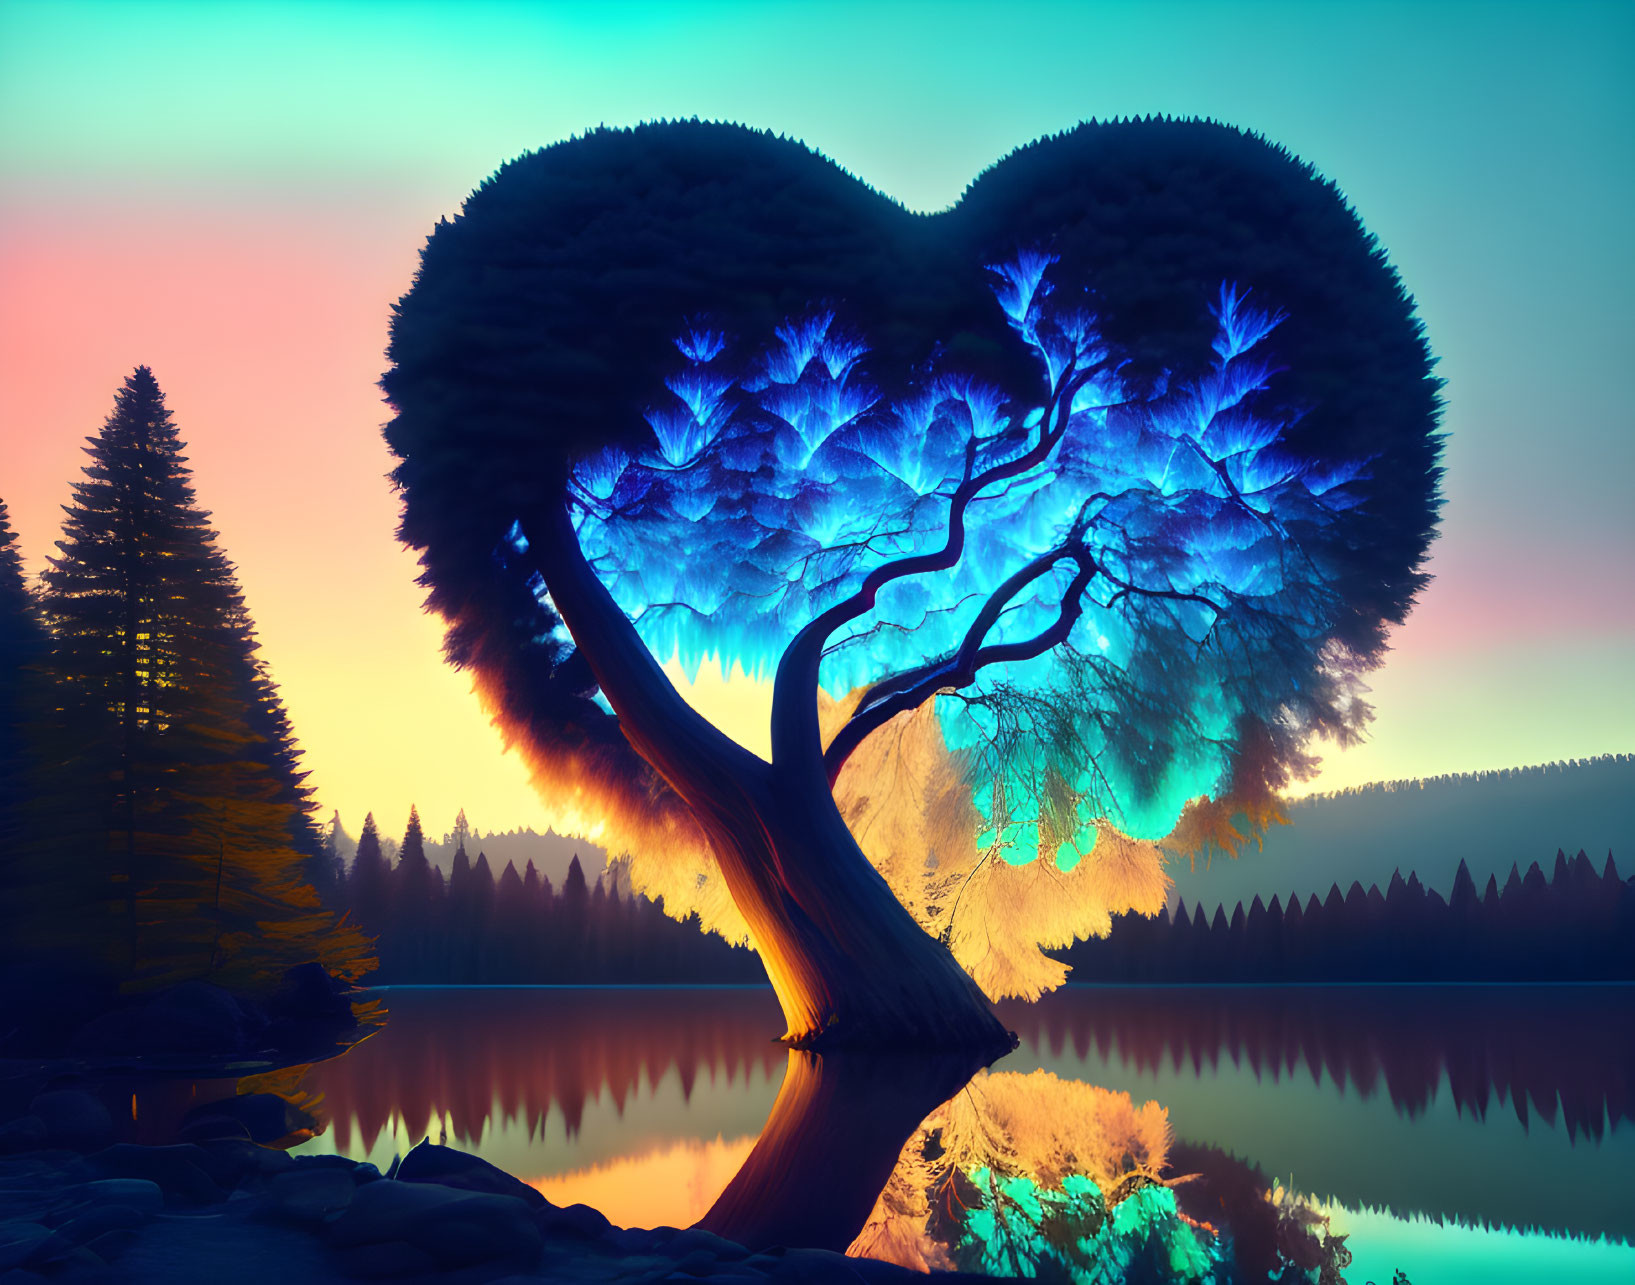 Heart-shaped tree with blue leaves by calm lake at dusk